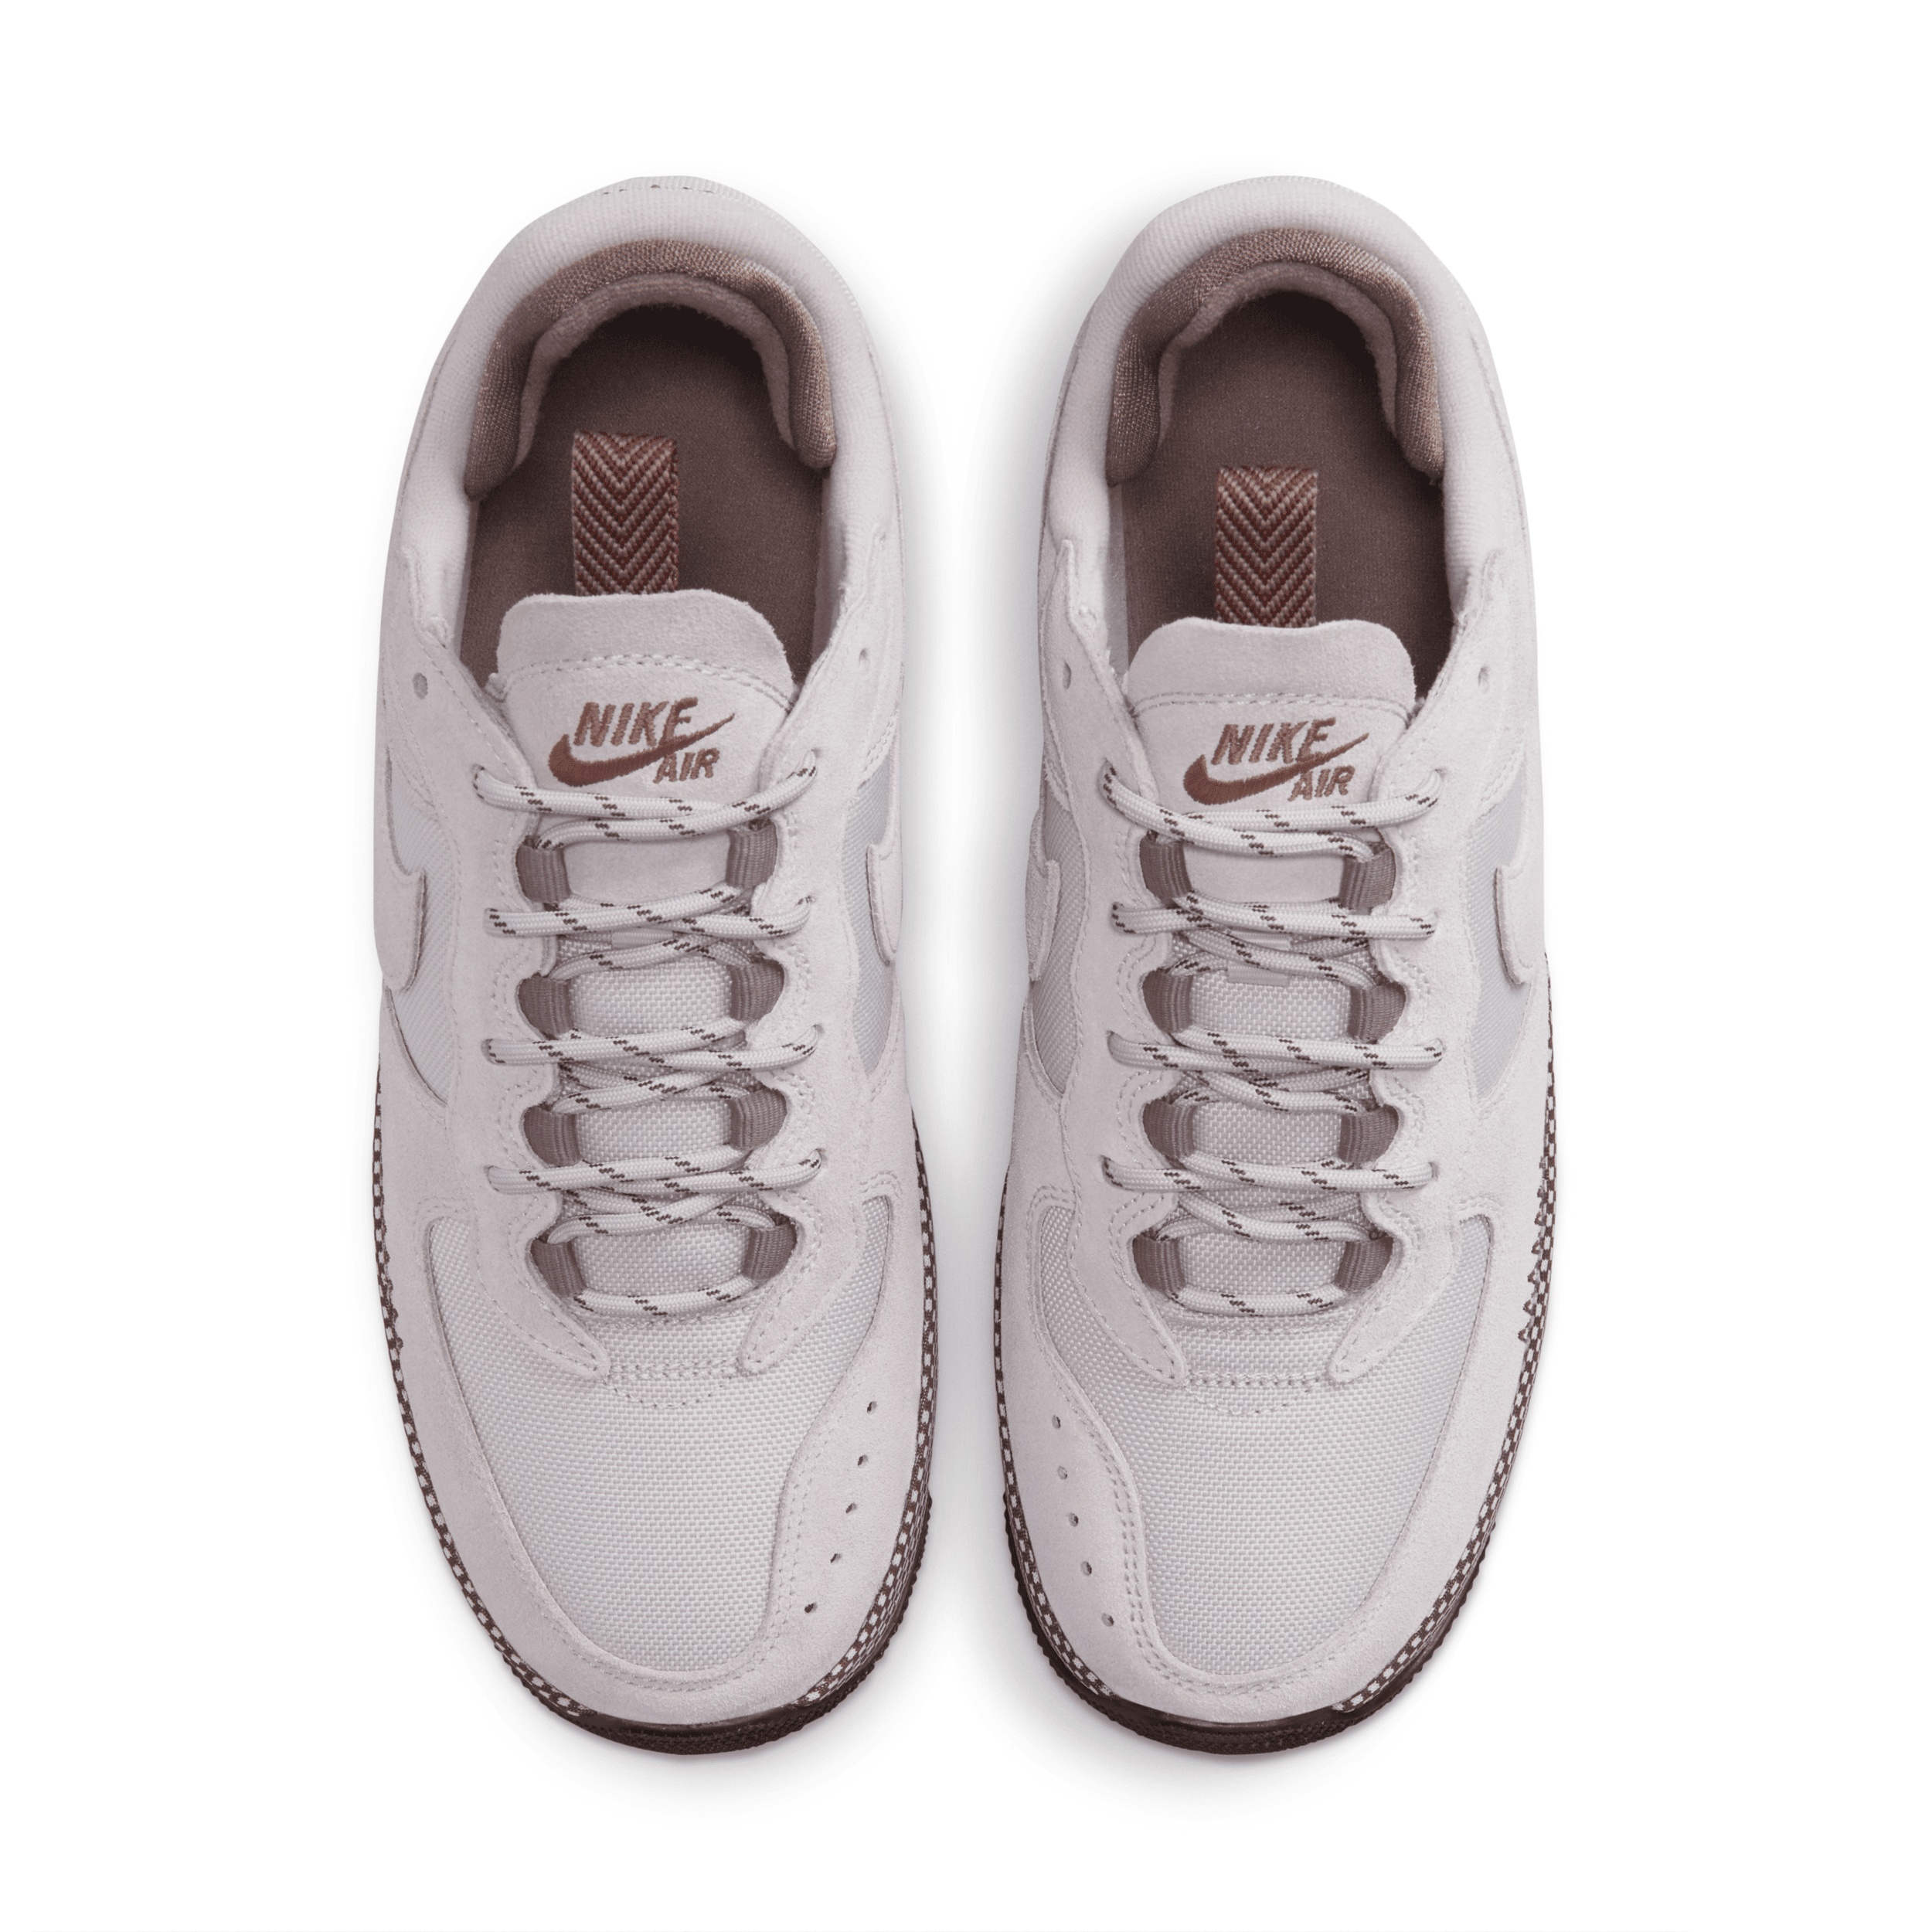 Nike Women's Air Force 1 Wild Shoes - 5